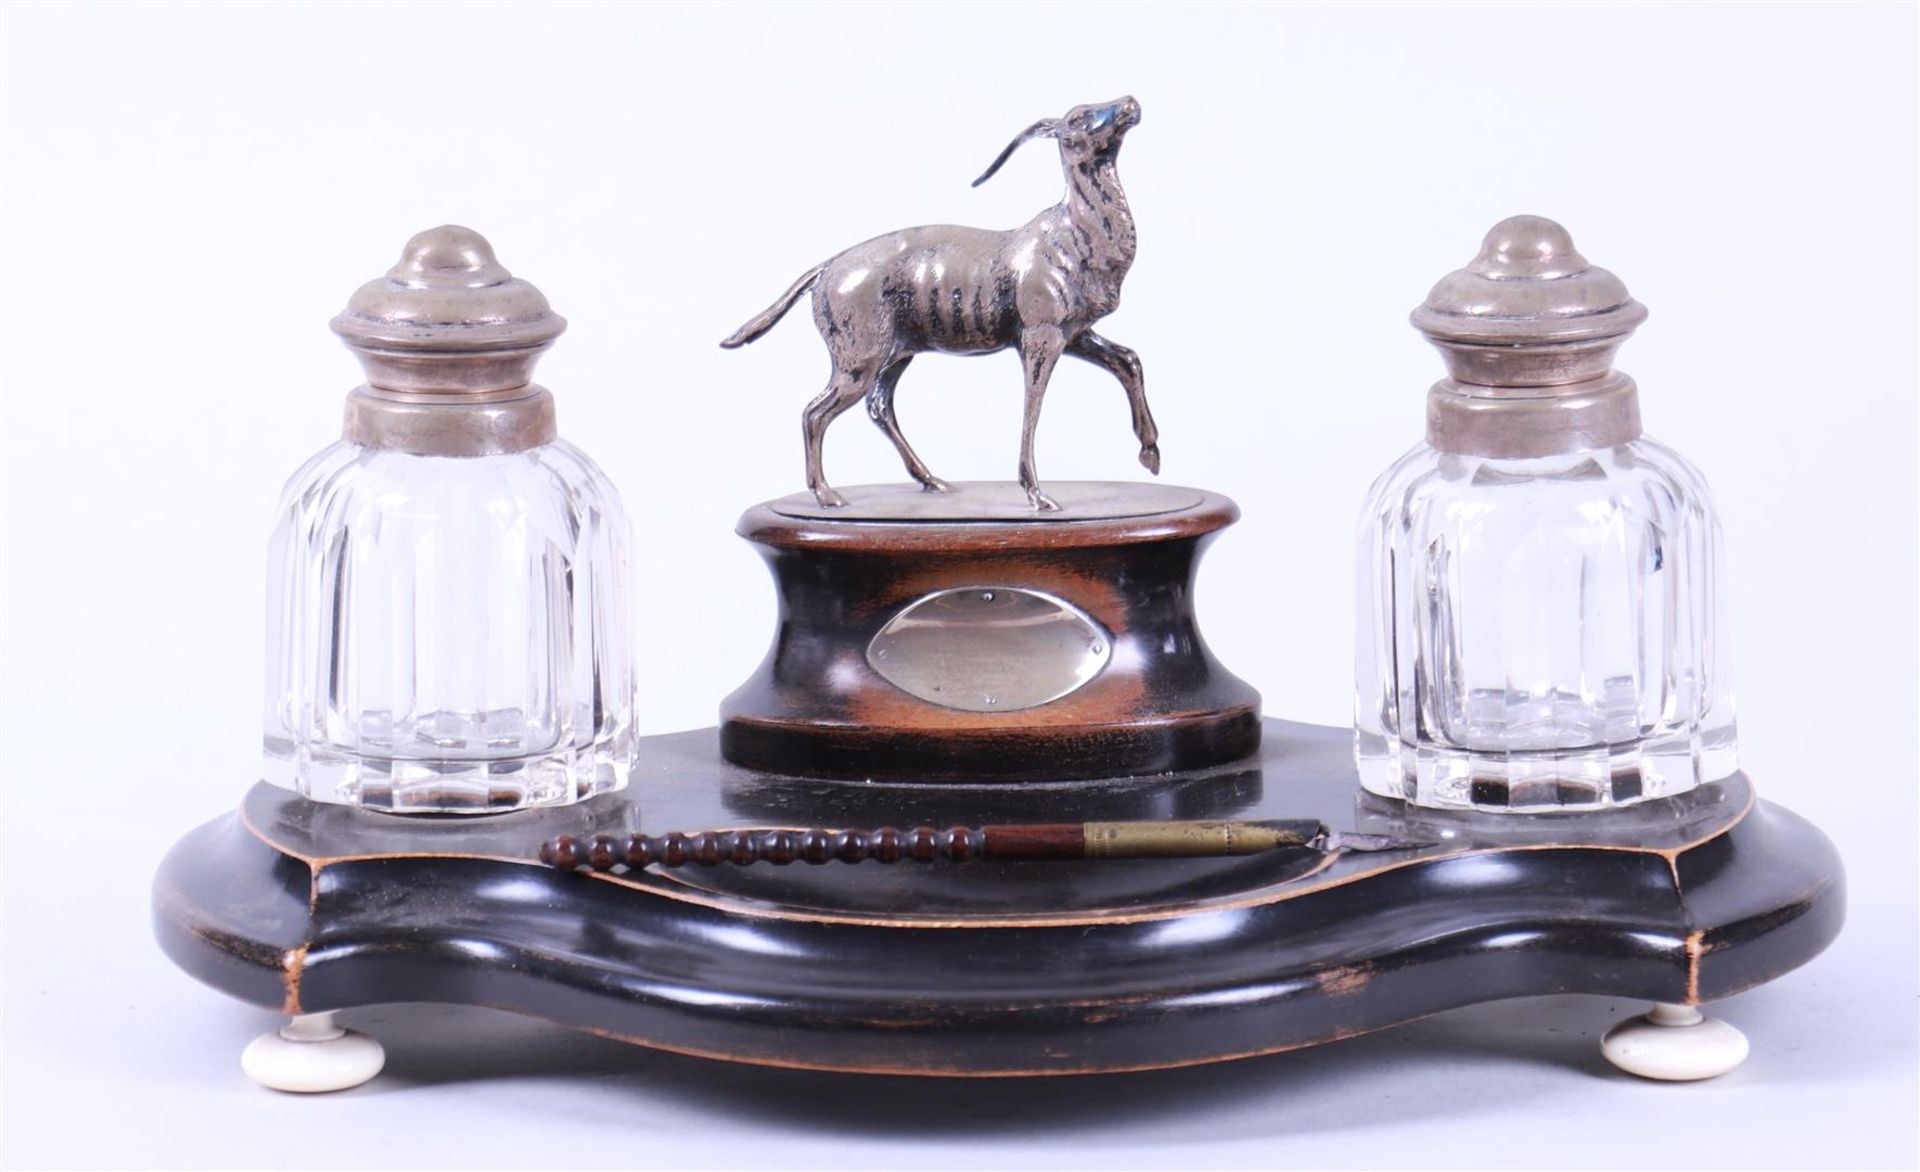 19th Century Inkstand with Silver Deer and Lids on Jars